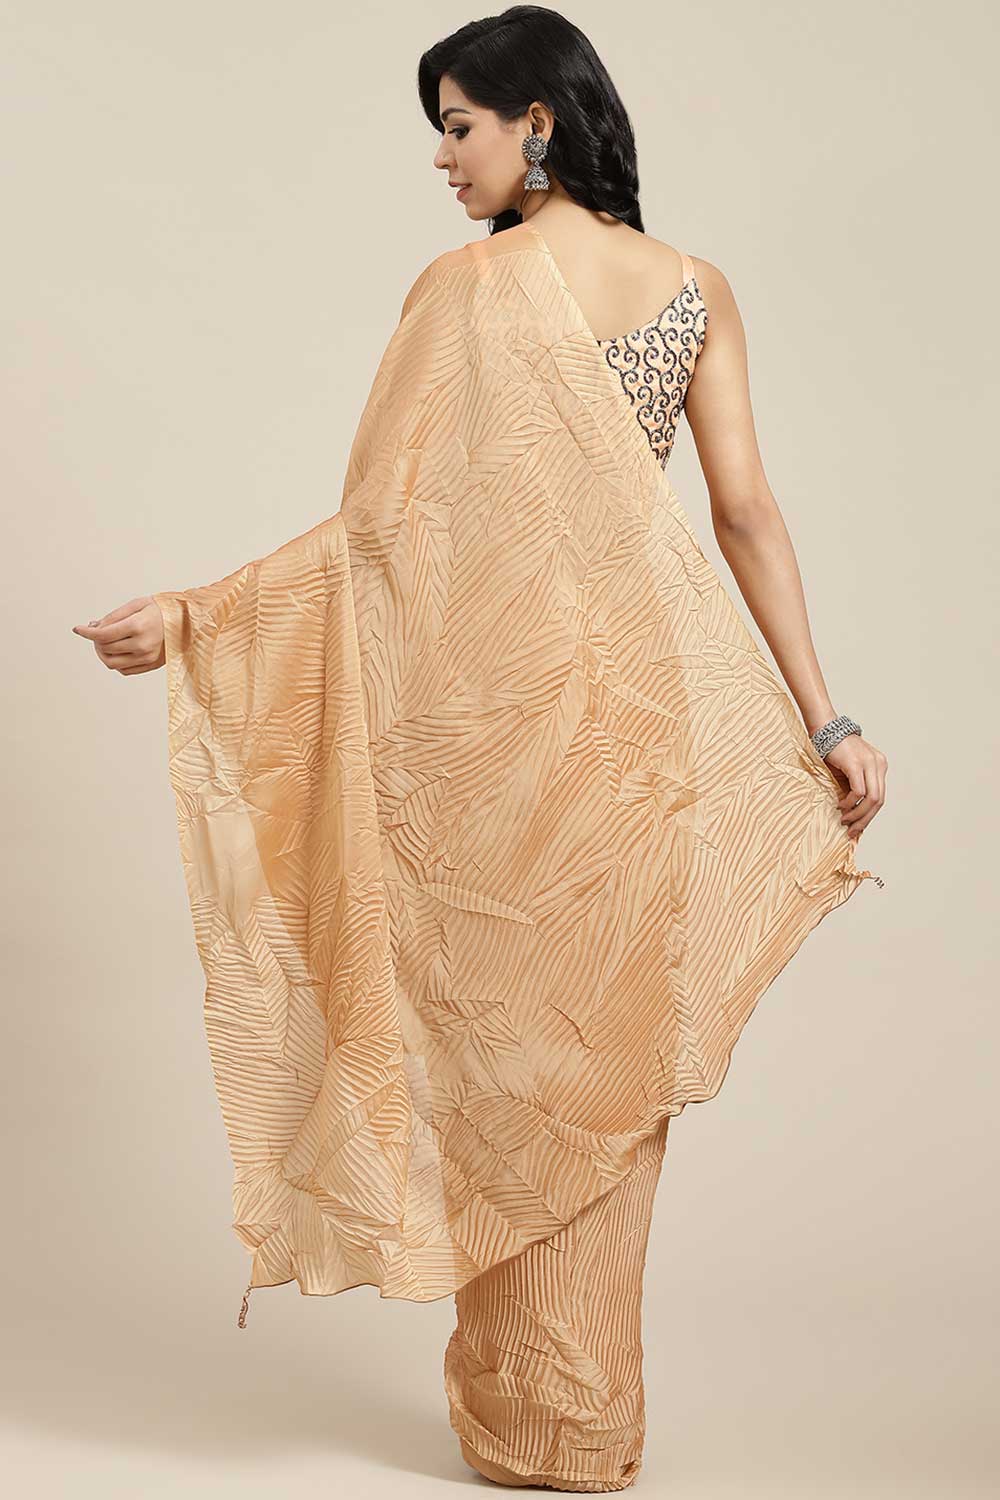 Shop Betty Cream Solid Georgette One Minute Saree at best offer at our  Store - One Minute Saree